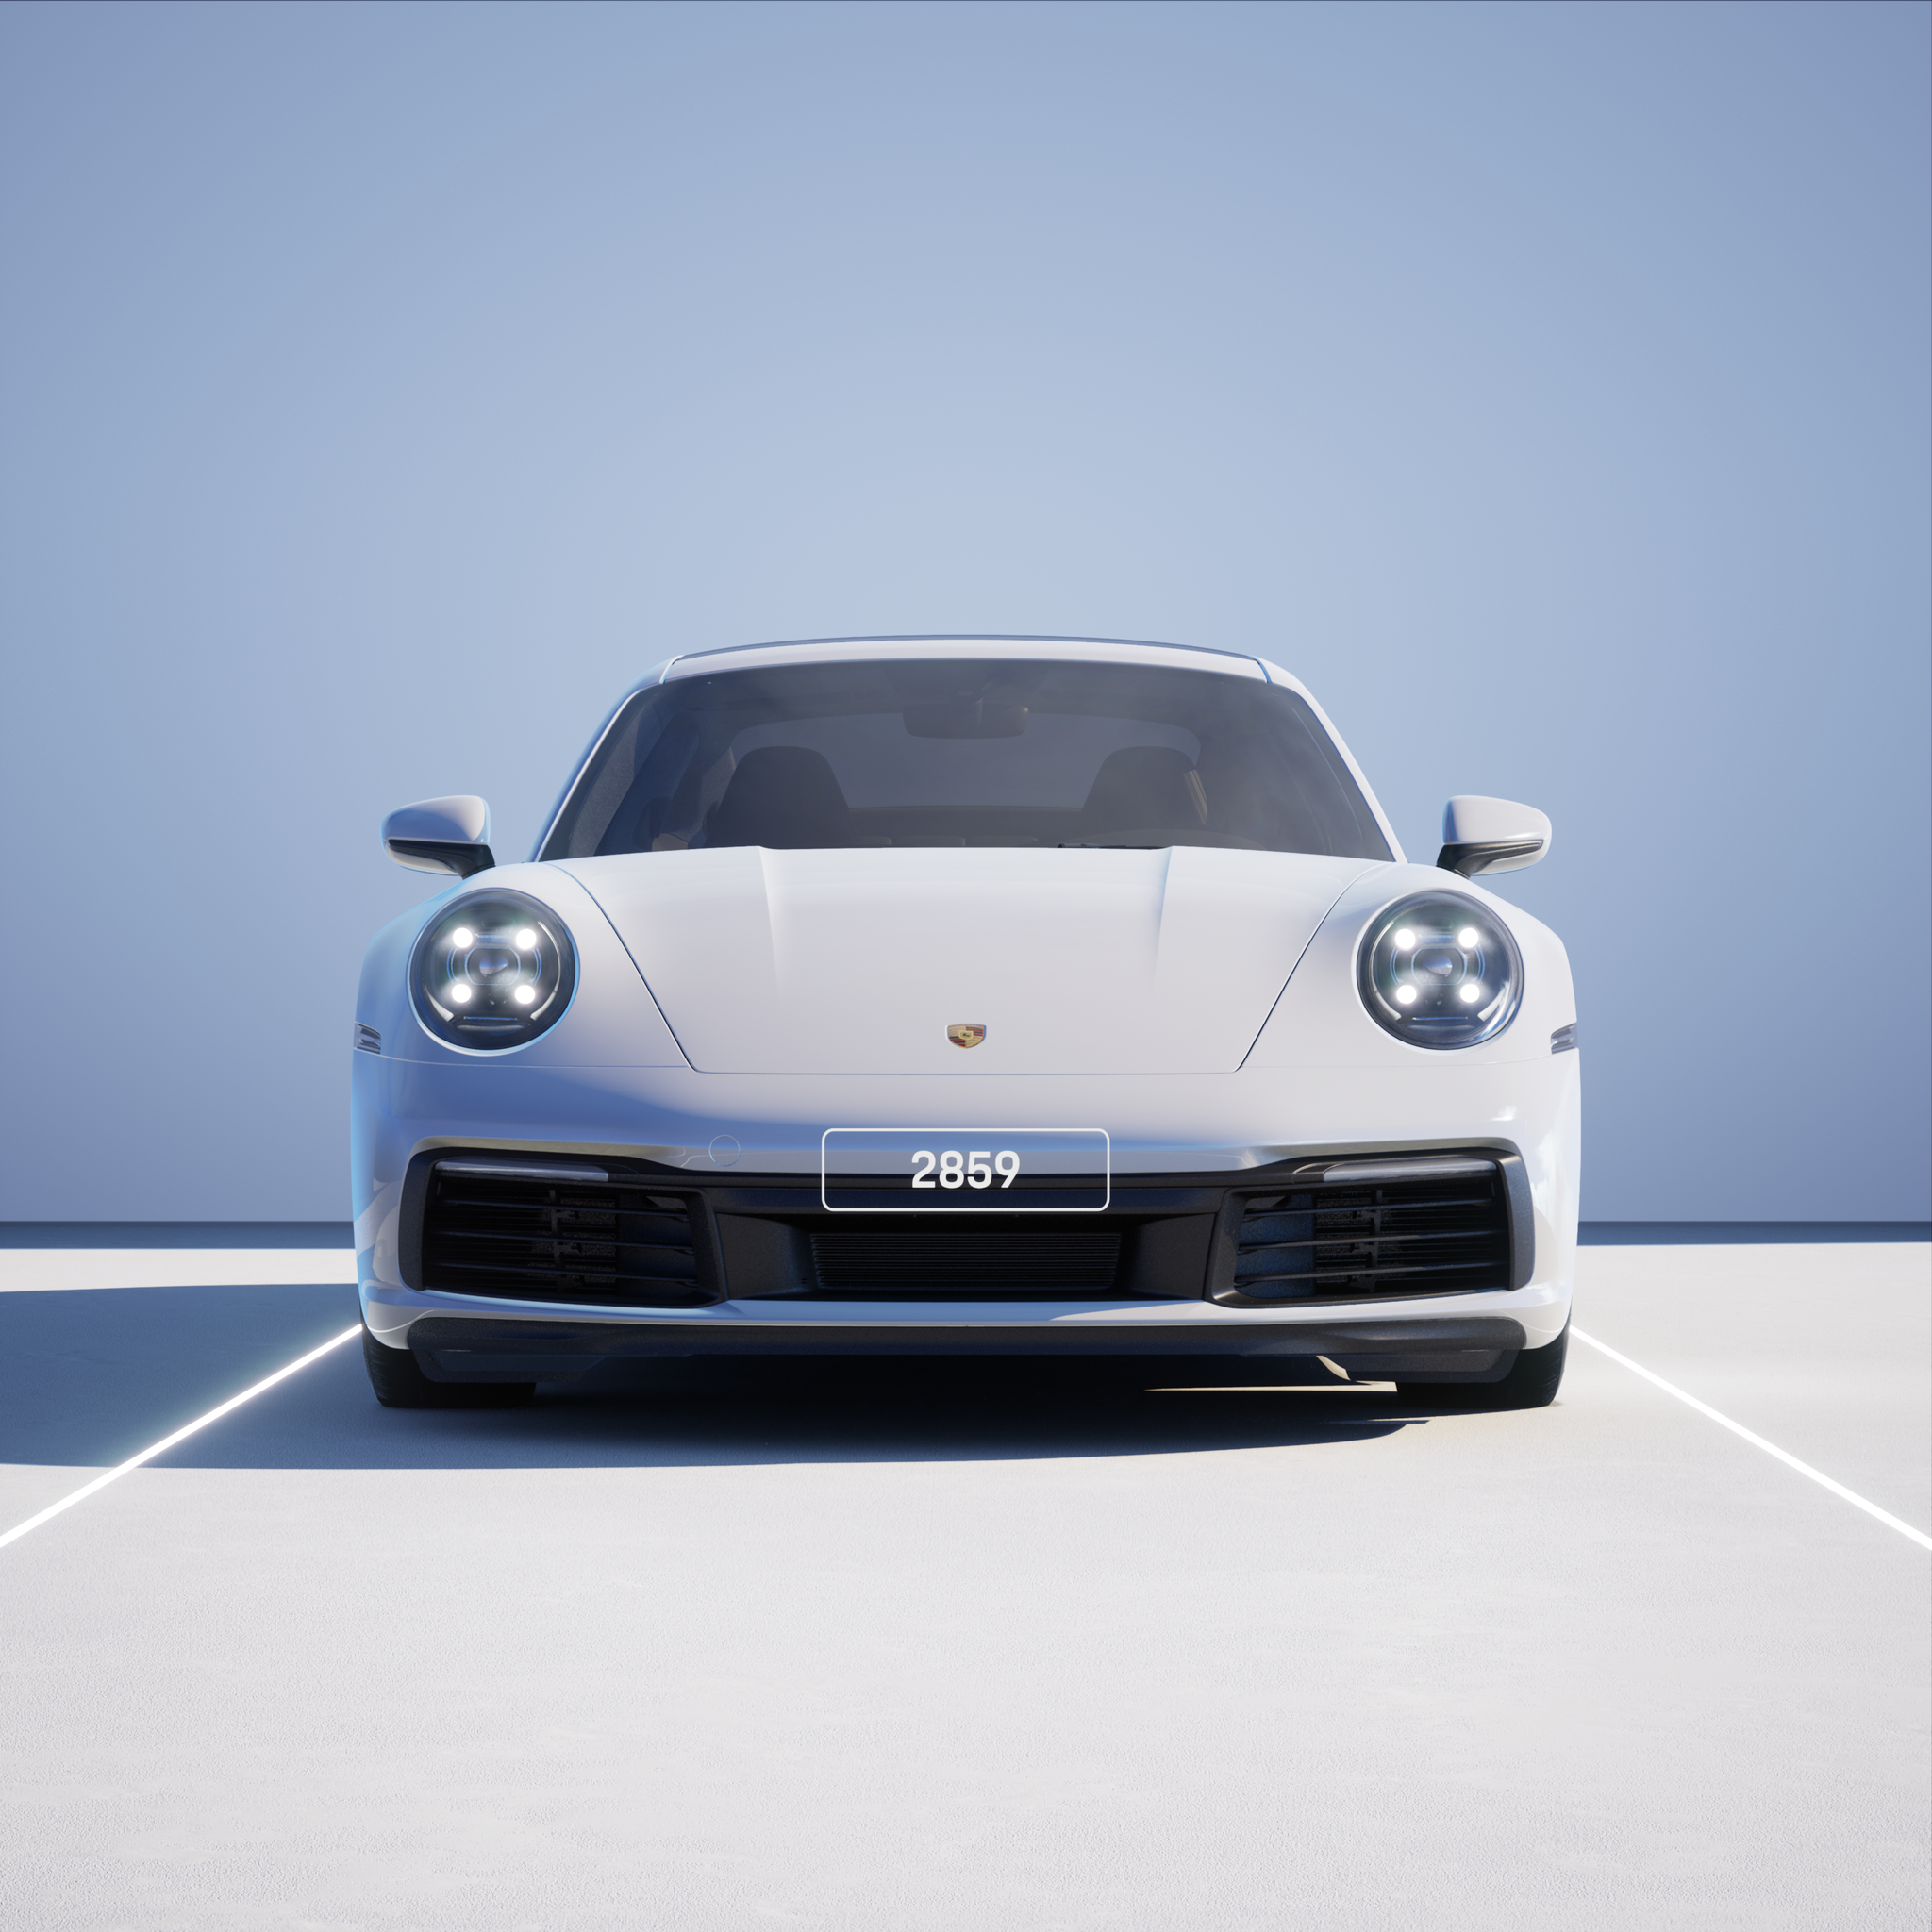 The PORSCHΞ 911 2859 image in phase